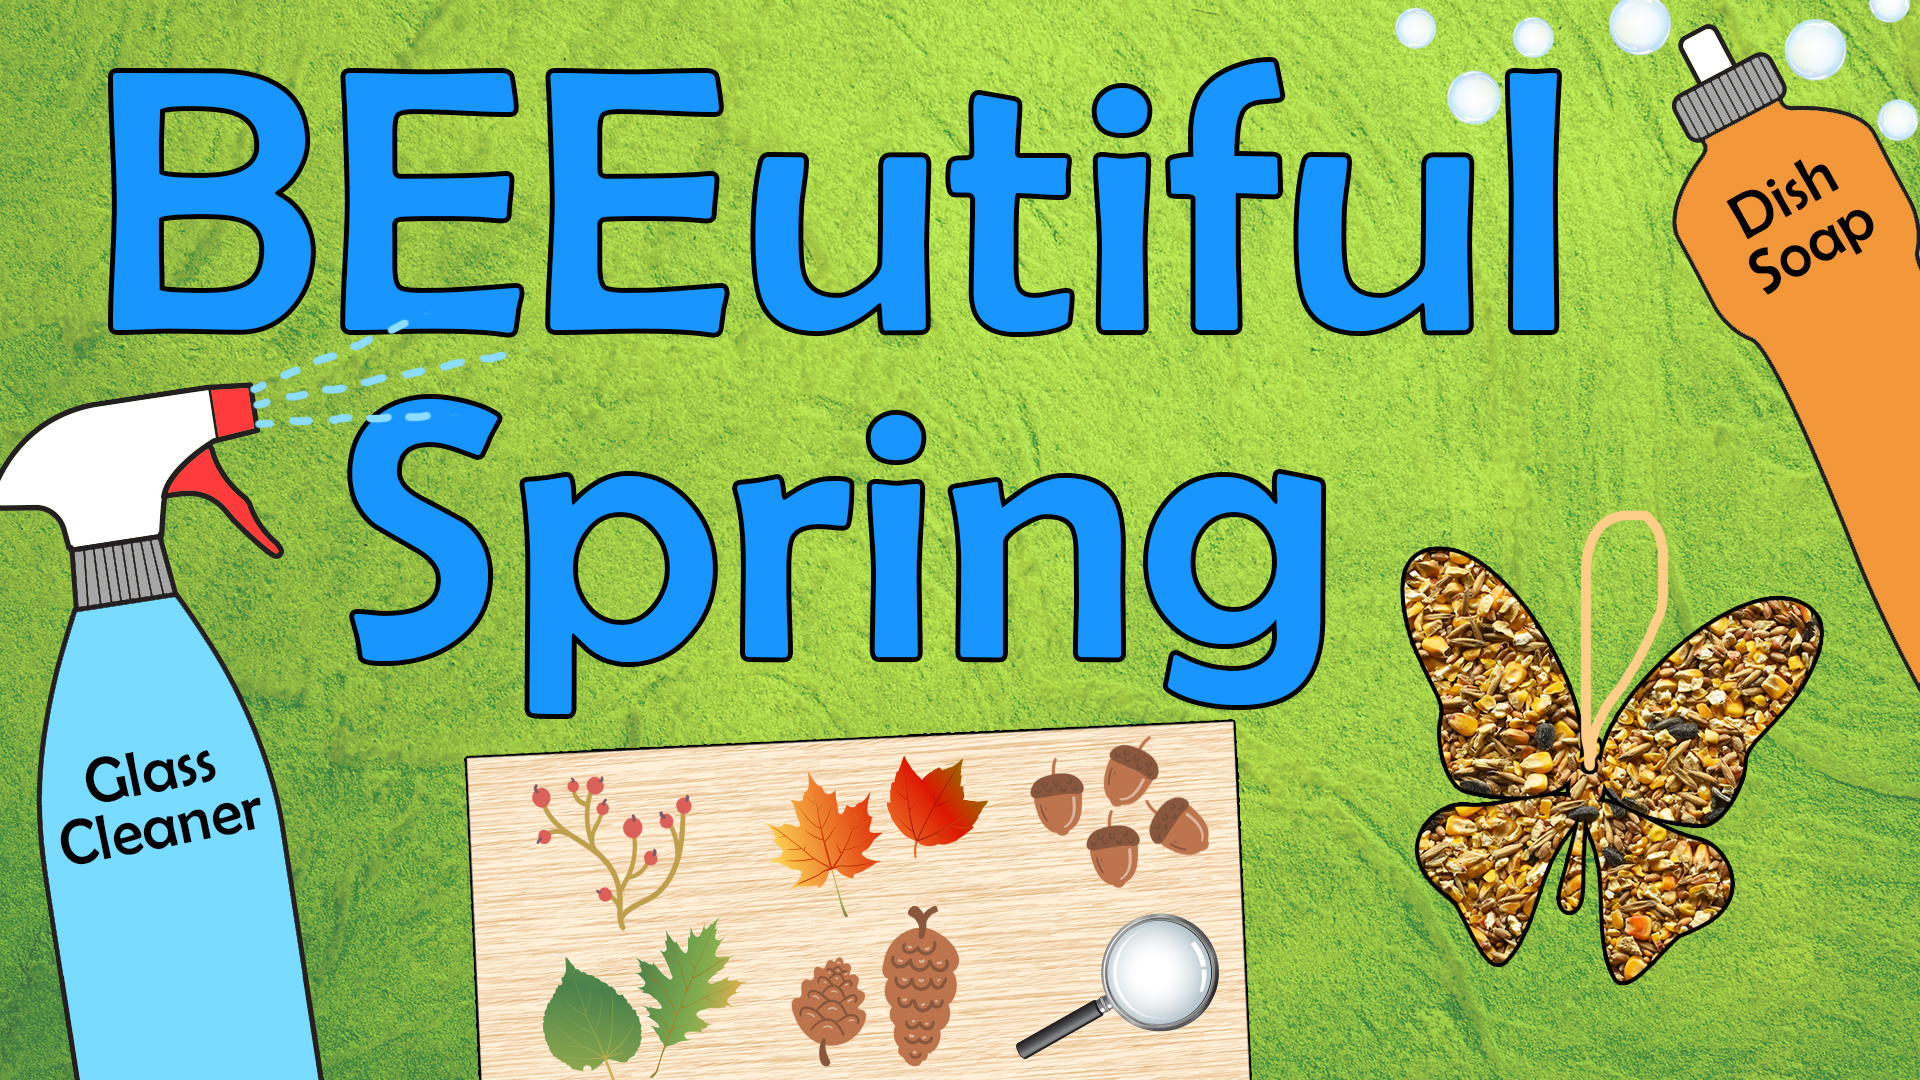 Image reads "BEEutiful Spring" against a green textured background. A spray bottle of glass cleaner and a tray filled with leaves and nature items are under the title. A bottle of dish soap and a butterfly shaped birdseed ornament are to the right of the title.